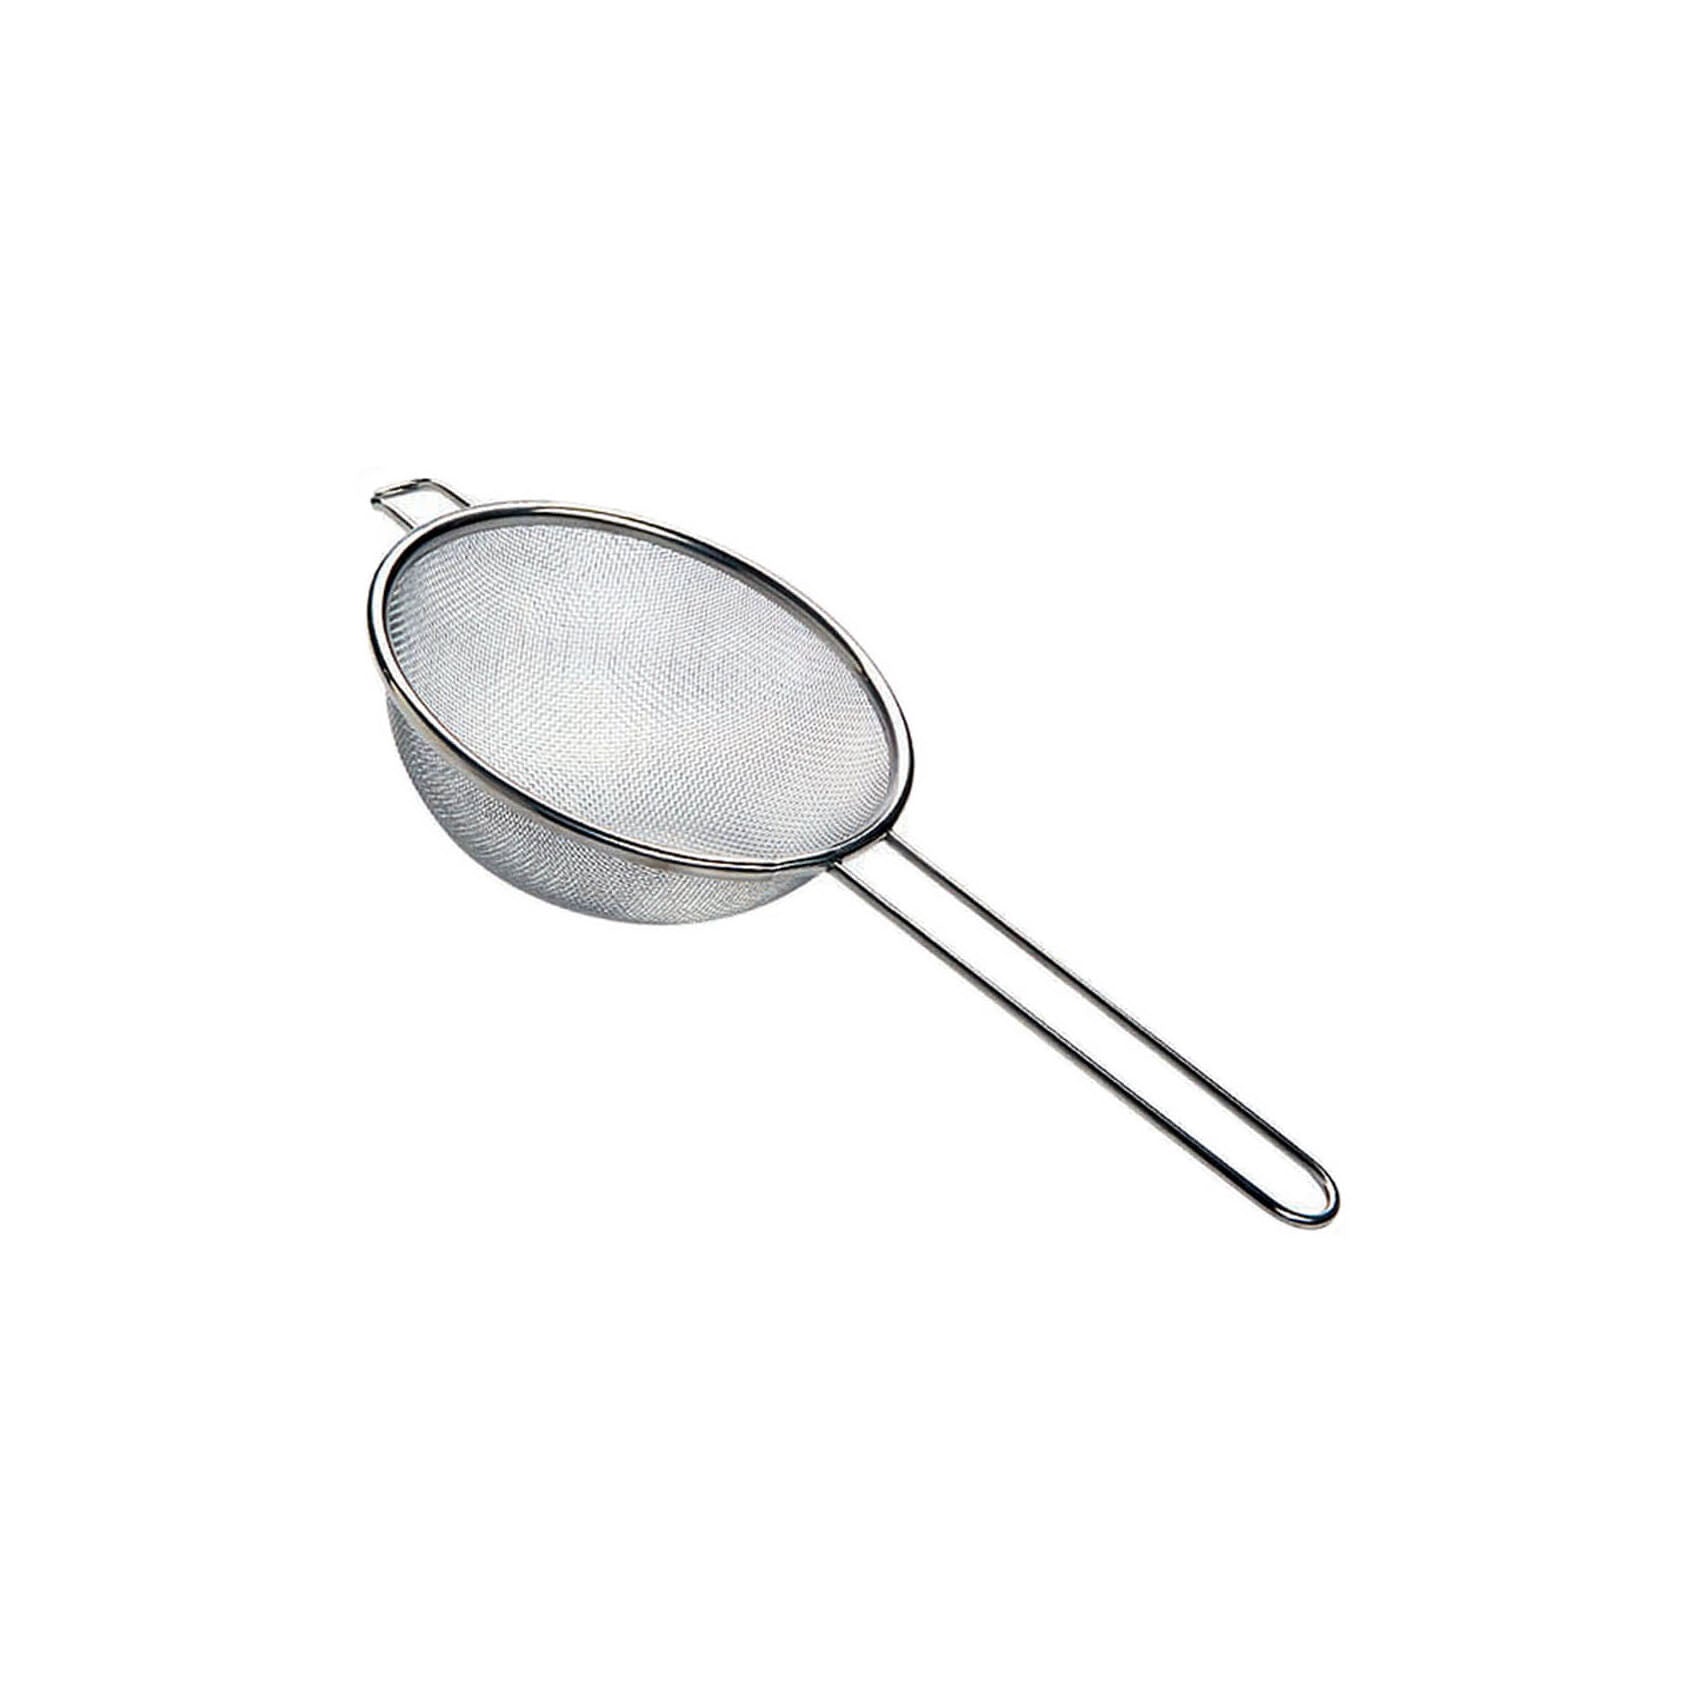 MATFER S/S Small Strainer with Handle